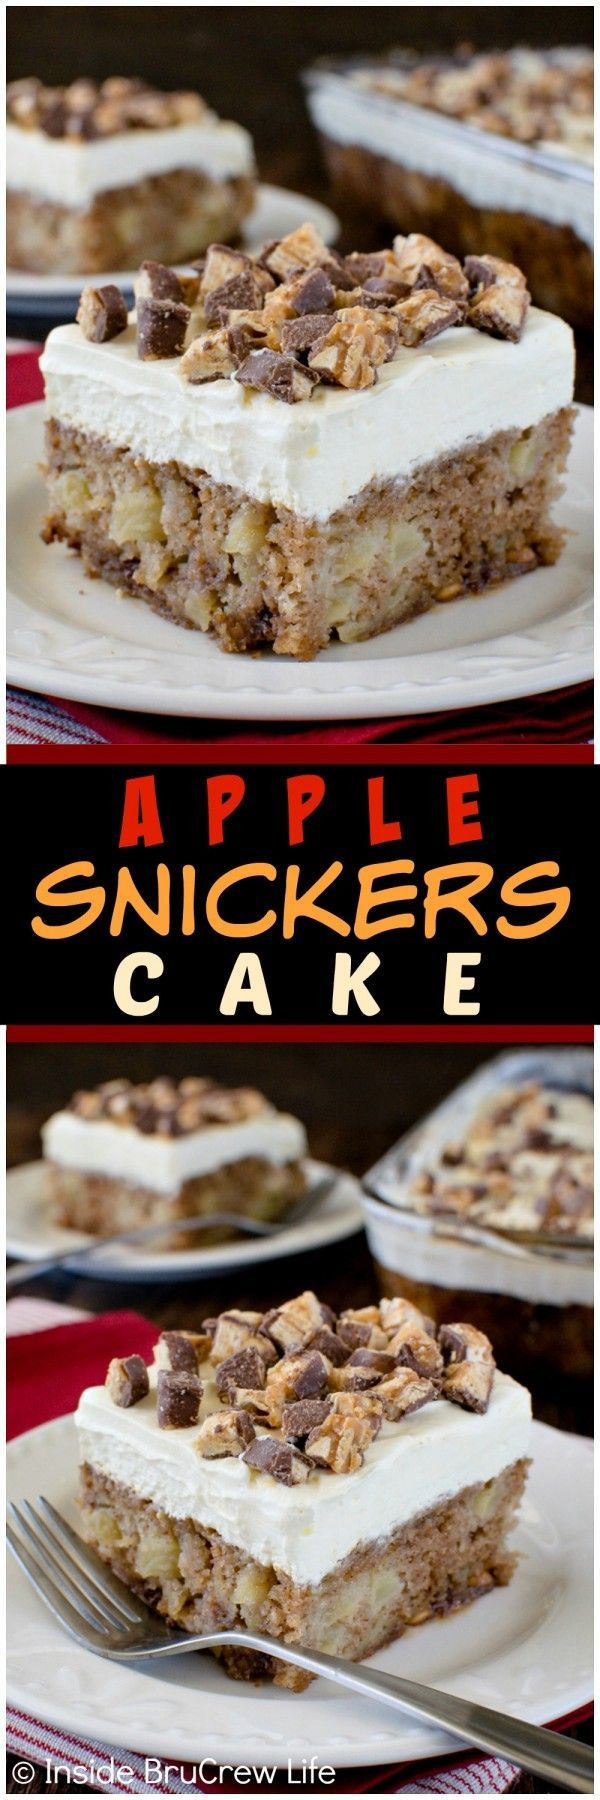 Great Fall Desserts
 Best 25 Snickers cake recipes ideas on Pinterest